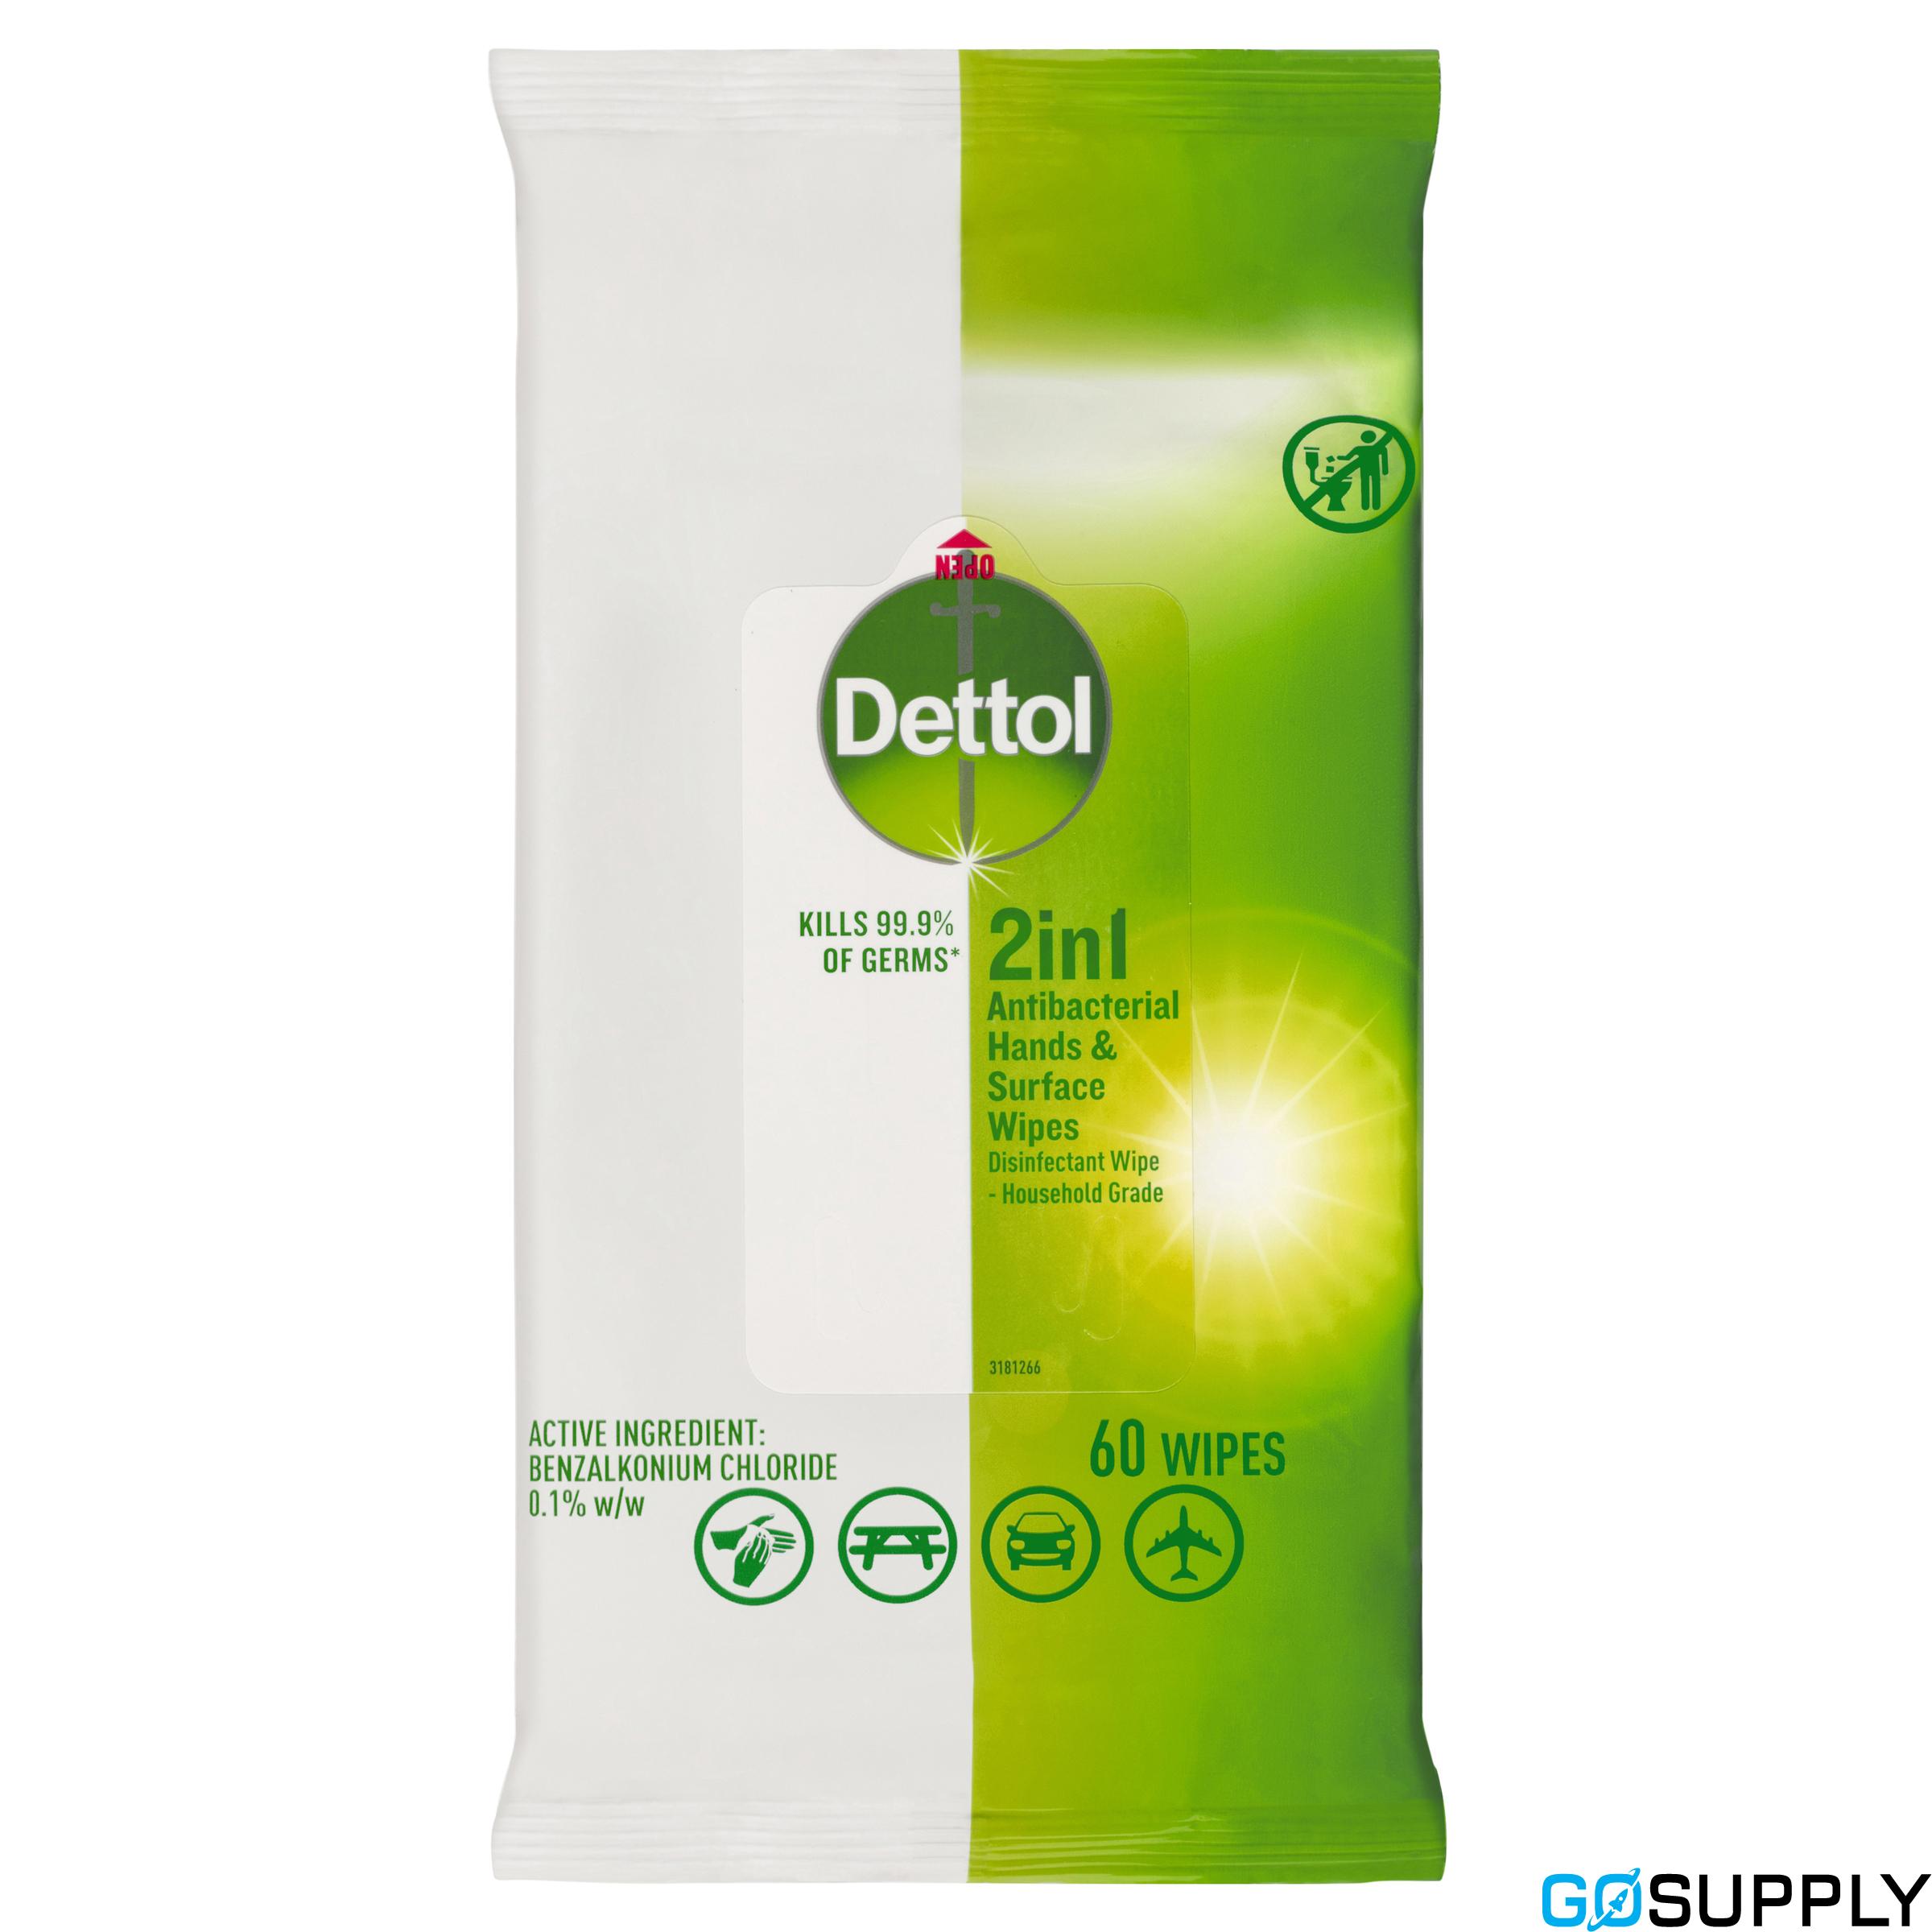 Dettol 2 in 1 Hands and Surfaces Antibacterial Wipes 60pk